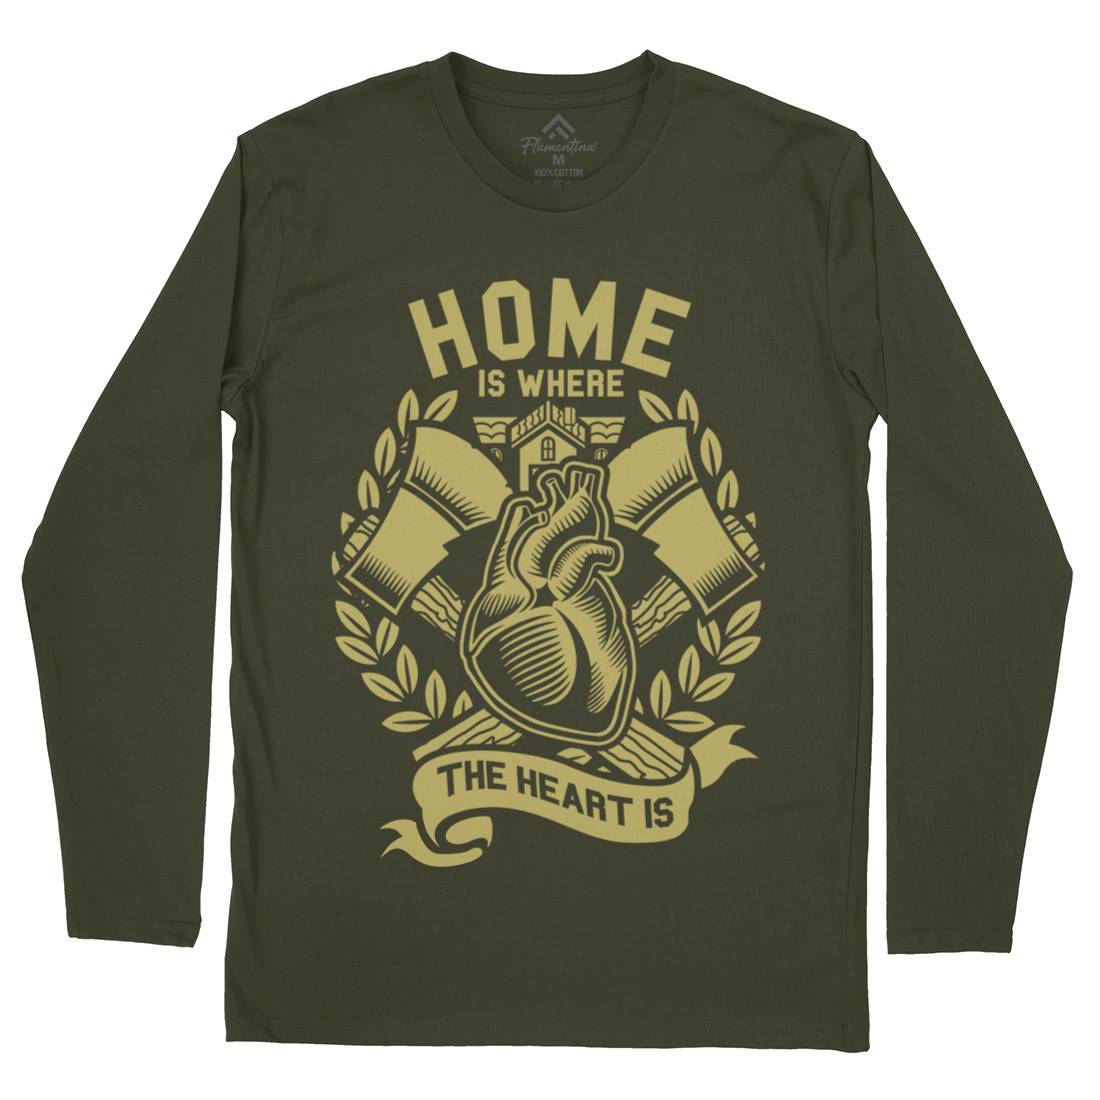 Home Mens Long Sleeve T-Shirt Quotes A241